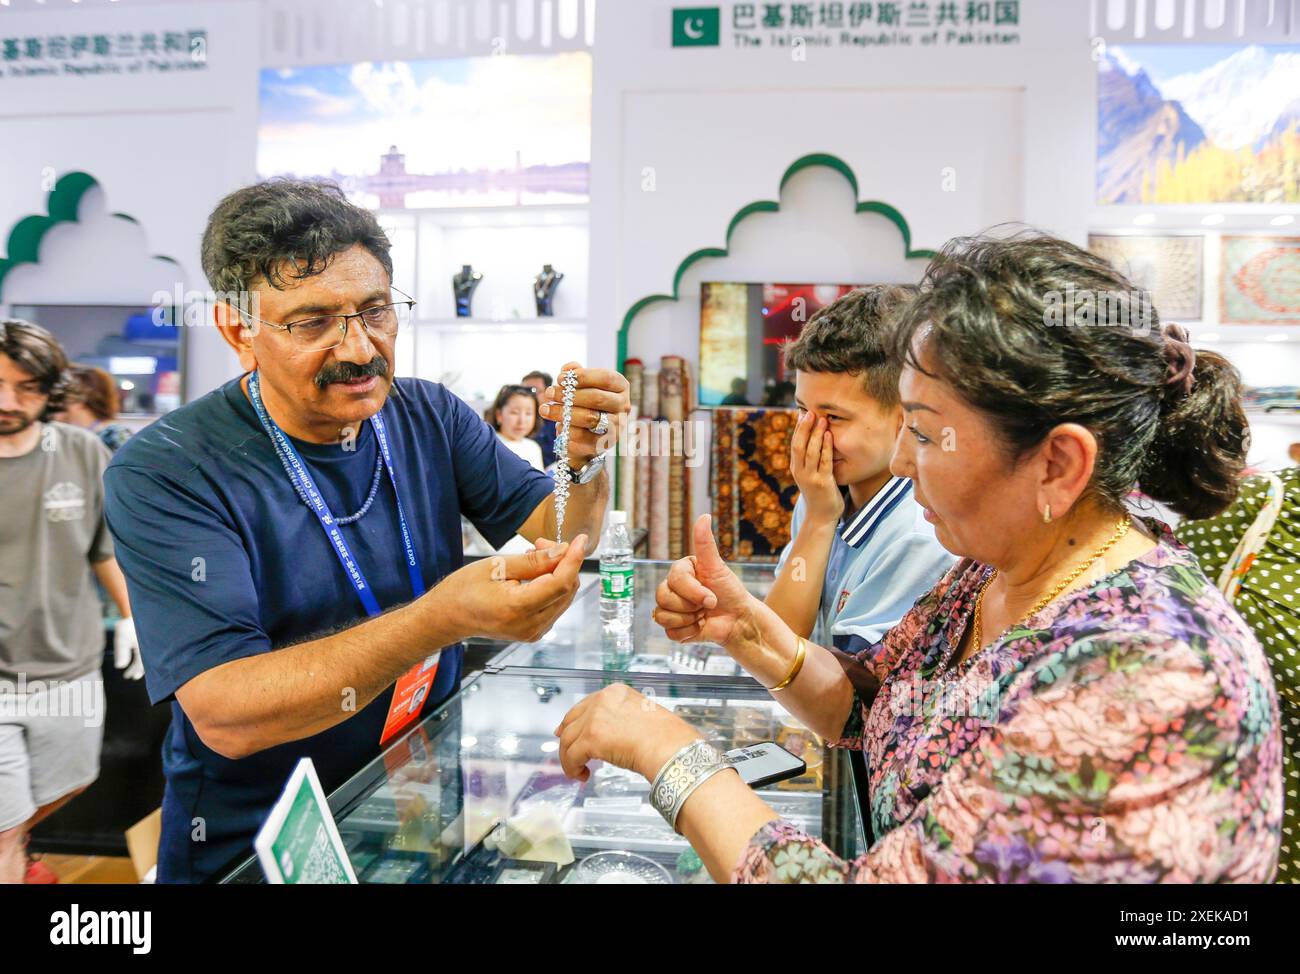 (240628) -- URUMQI, June 28, 2024 (Xinhua) -- Visitors select jewelry at the booth of Pakistan during the 8th China-Eurasia Expo in Urumqi, northwest China's Xinjiang Uygur Autonomous Region, June 27, 2024. Businessmen from many parts of the world have gathered in northwest China's Xinjiang, displaying exquisite goods such as French wine, Serbian coffee, Australian chocolate and Ghanaian drums. The 8th China-Eurasia Expo, held at the Xinjiang International Convention and Exhibition Center at the foot of the Tianshan Mountains, commenced Wednesday in the regional capital of Urumqi. Themed Stock Photo